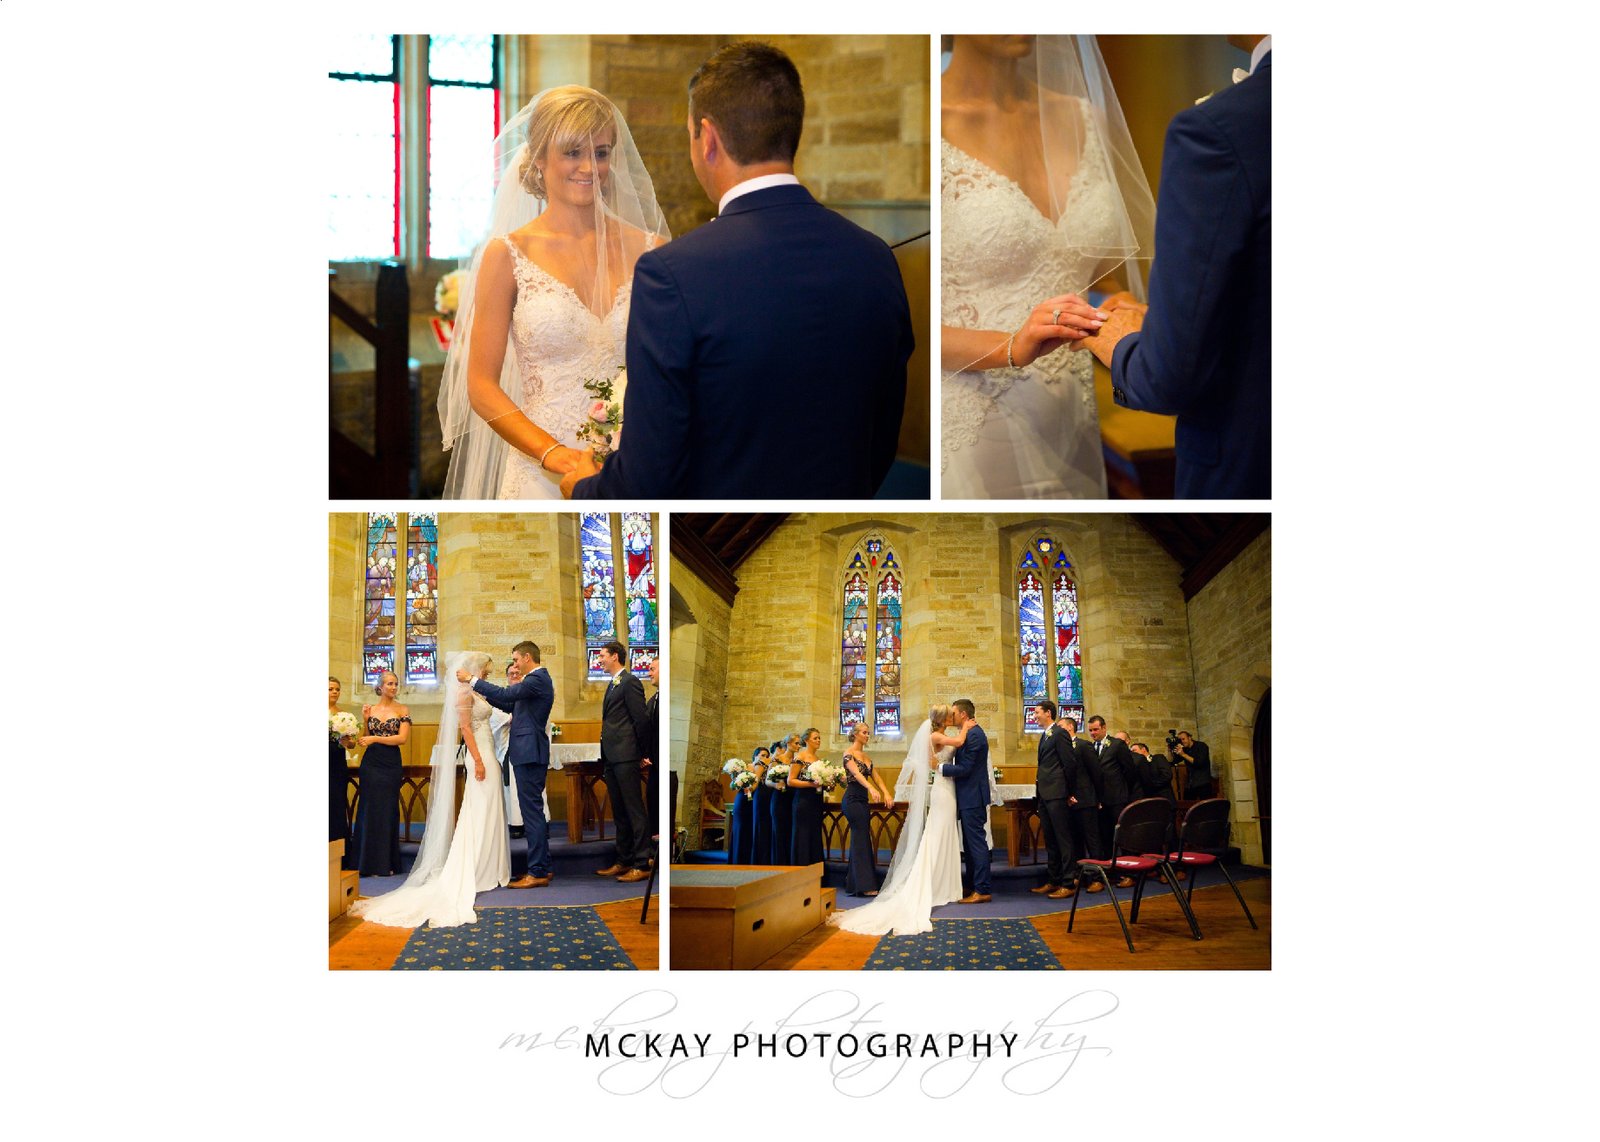 The wedding ceremony at St Stephen's Church Mittagong